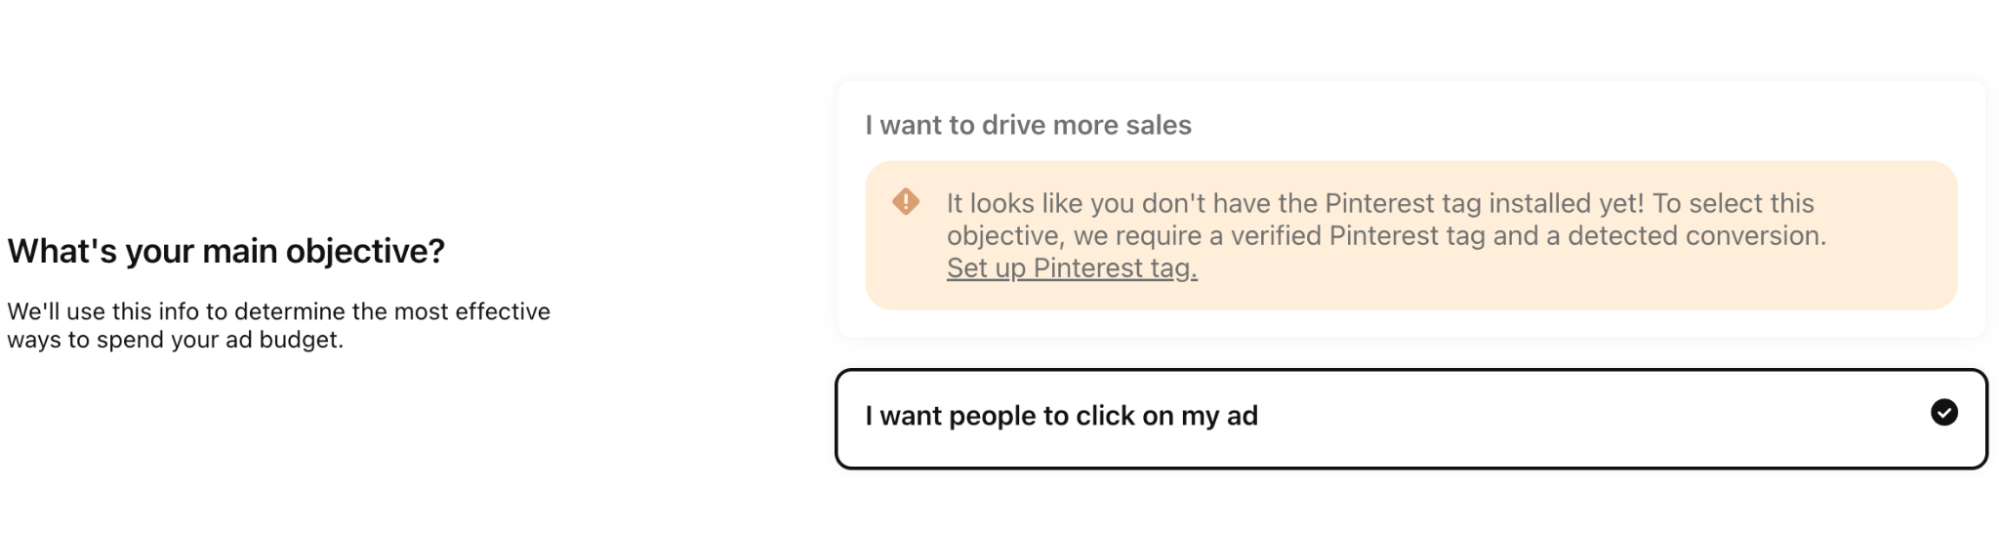 Choosing a campaign objective for Pinterest ad